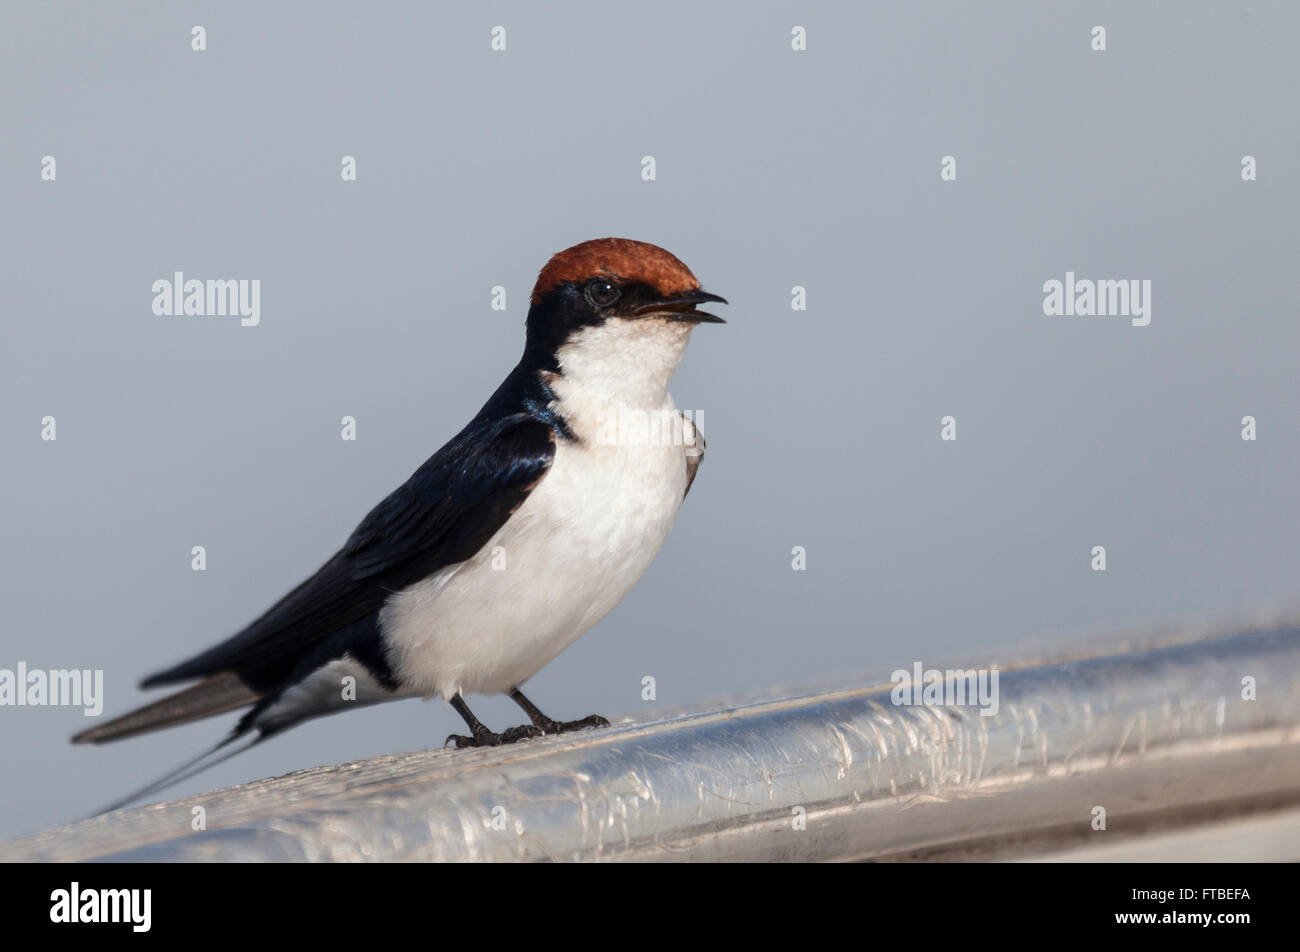 Wire-tailed Swallow, Hirundo smithii, perched on the edge of a small boat and calling. Chobe NP, Botswana, southern Africa. Stock Photo